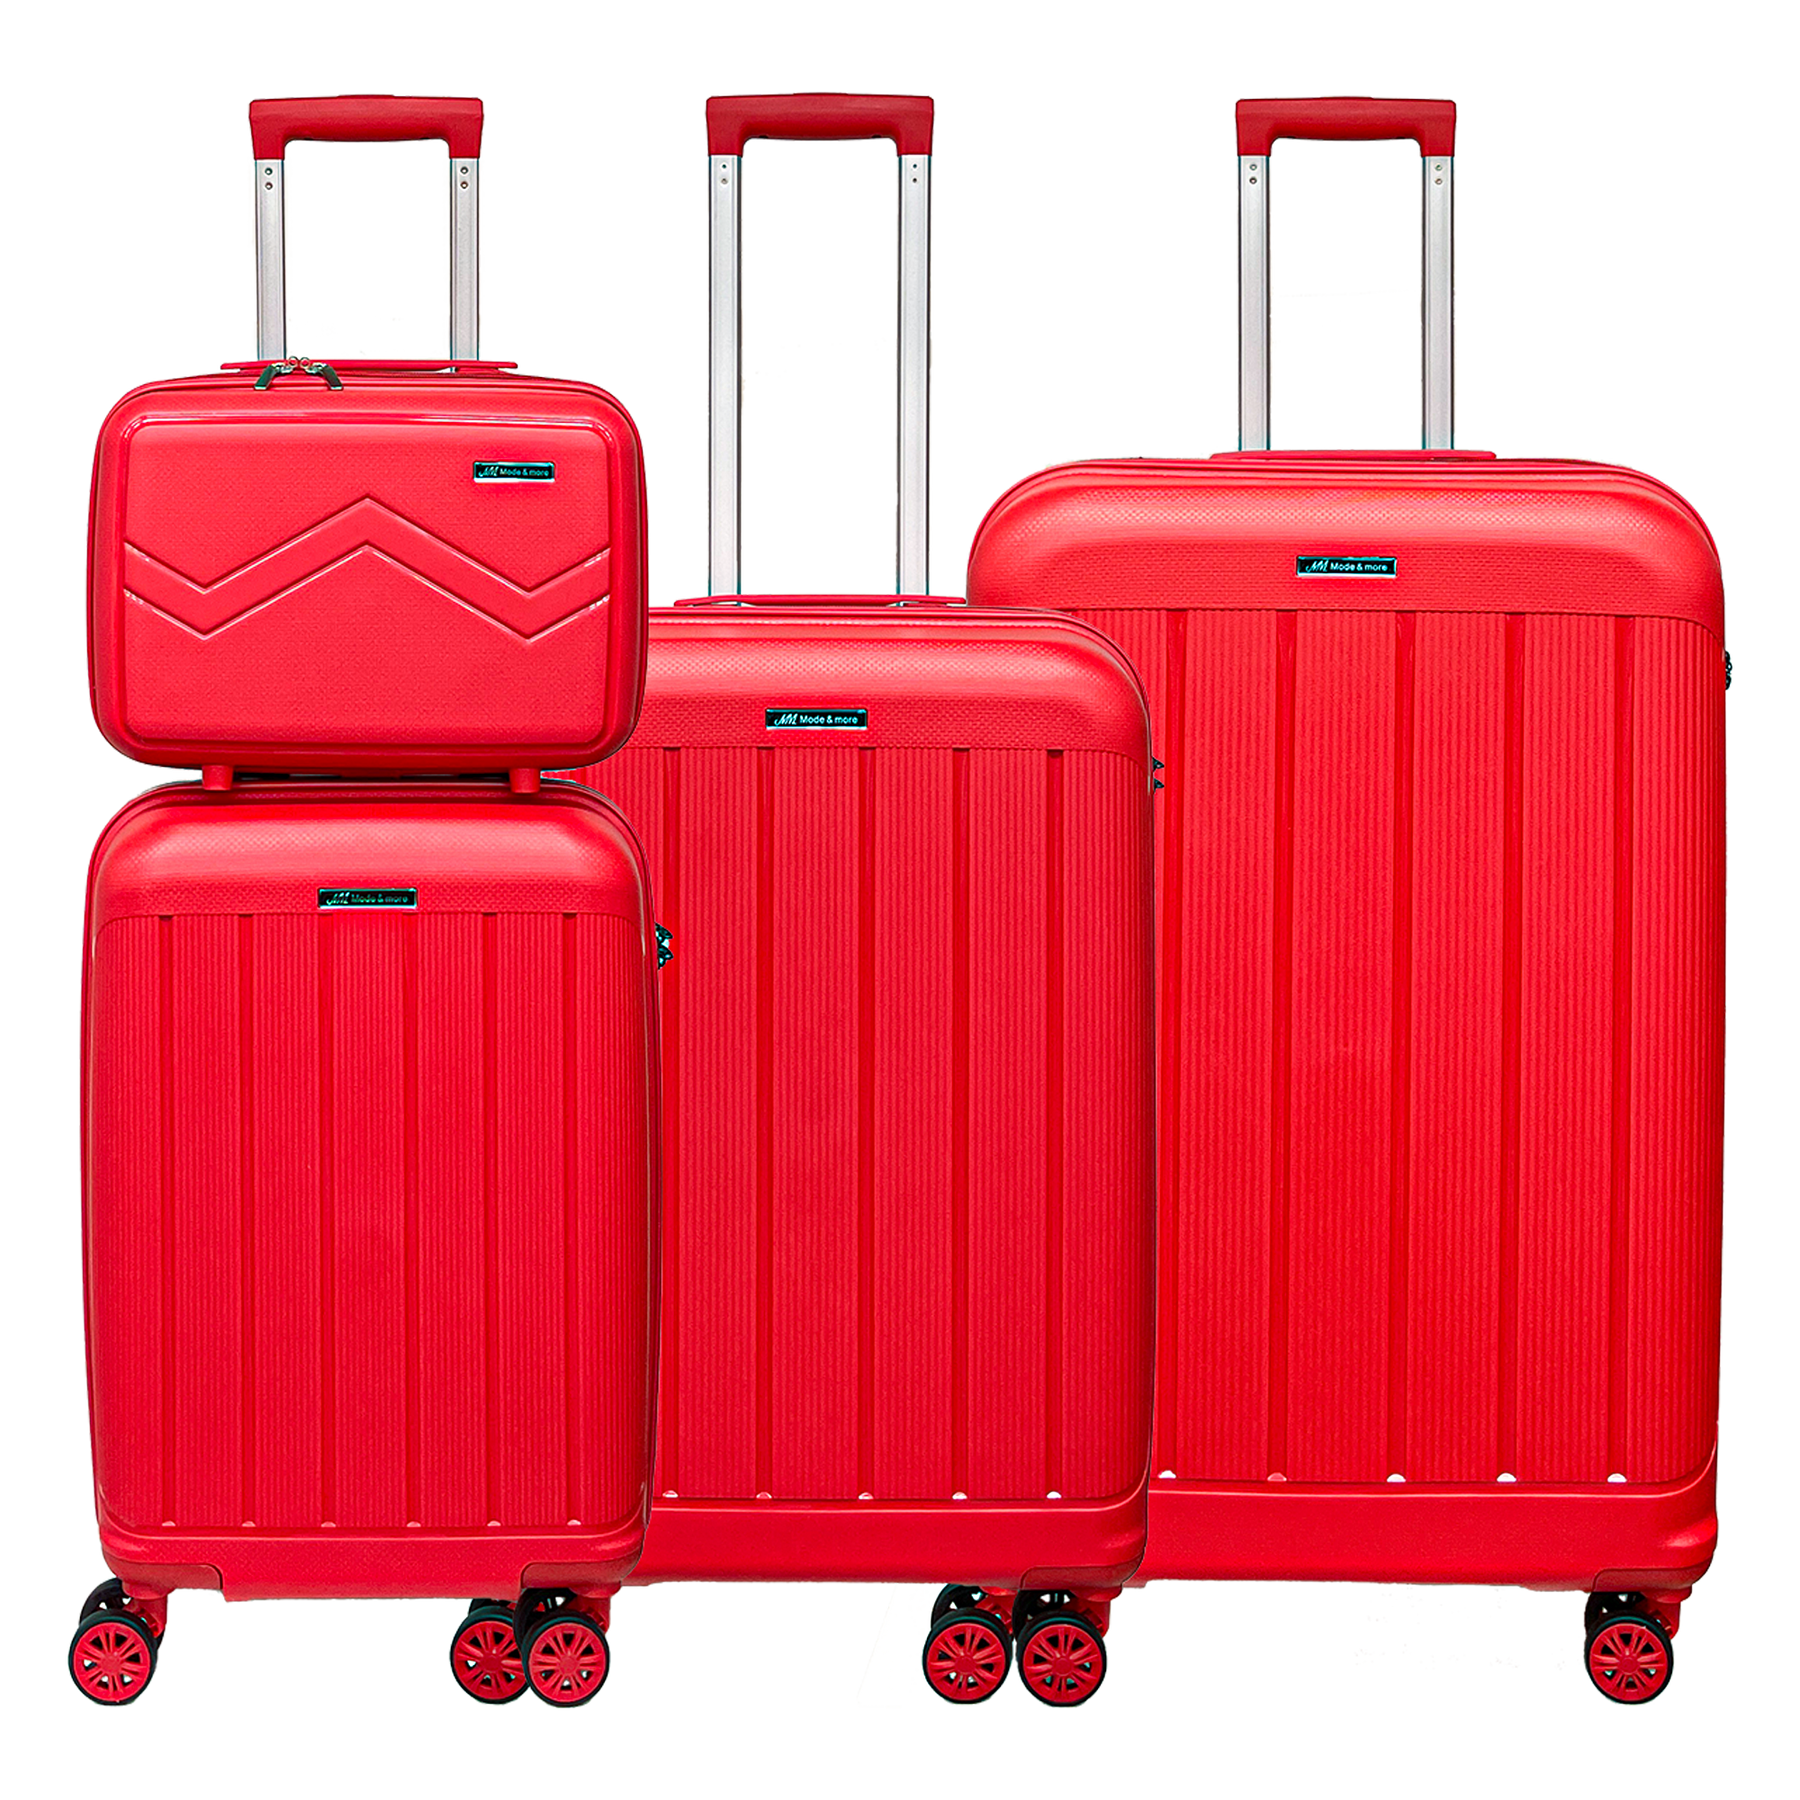 4-Piece Set of Soft Lightweight Polypropylene Suitcases With TSA Lock - High-Quality Ultra-Light Trolley Set With Beauty Case